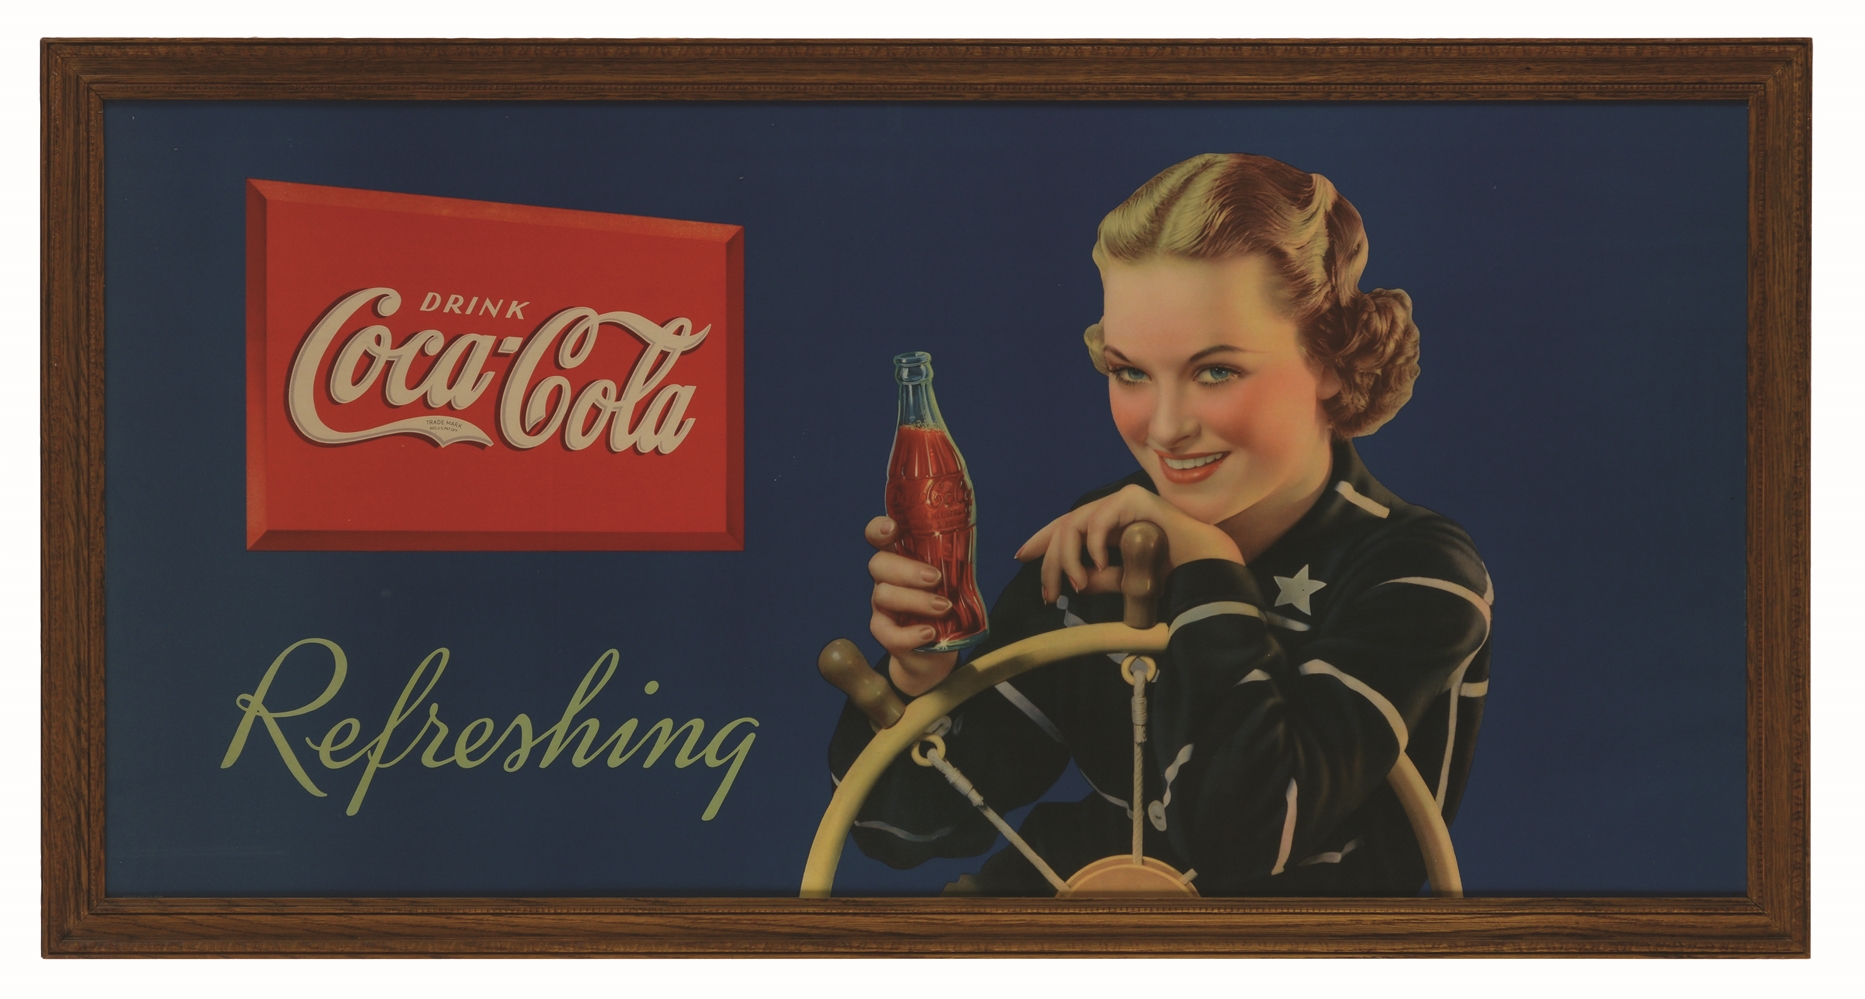 1936 RARE LARGE CARDBOARD COKE POSTER WITH GIRL AT SHIPS WHEEL.